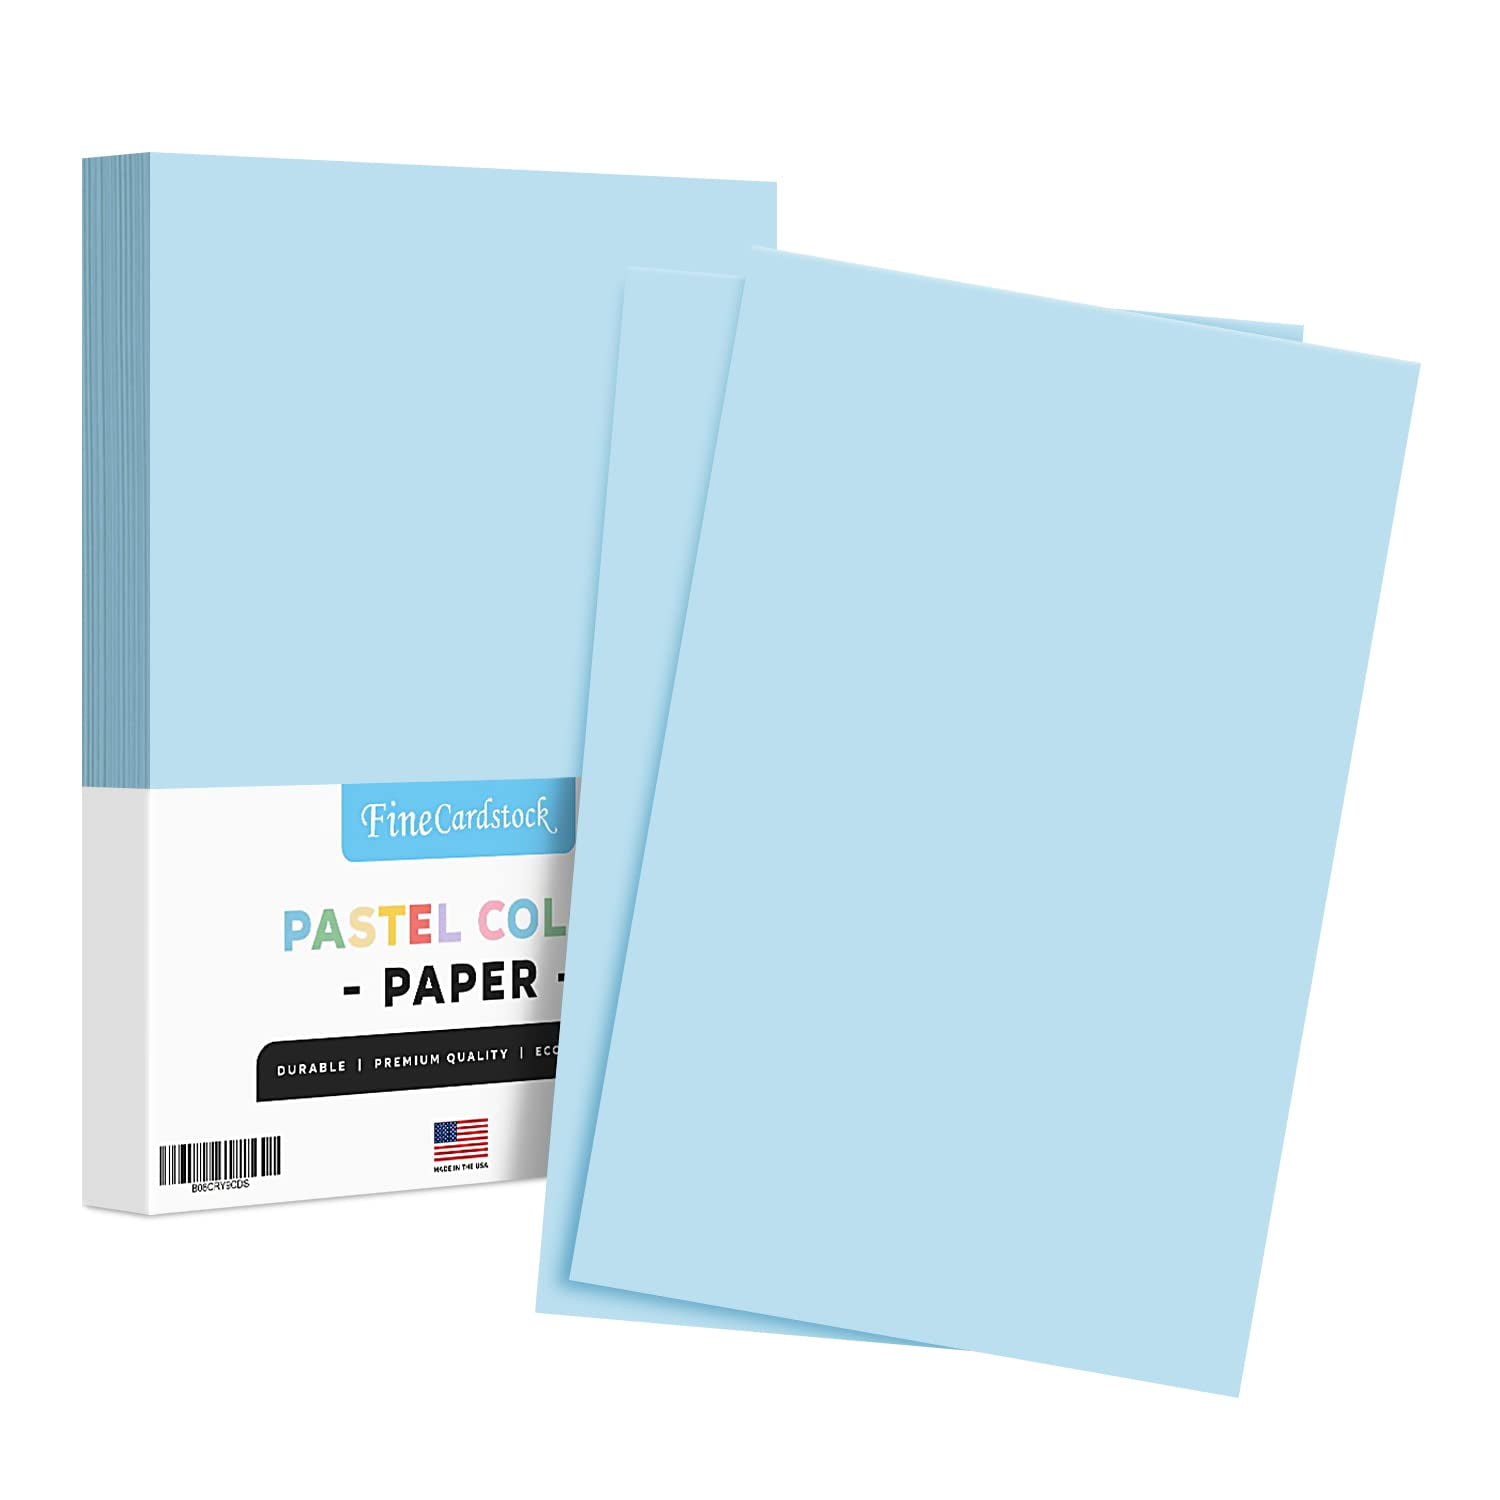 Ivory Pastel Colored Paper – 11 x 17 (Tabloid / Ledger Size) – Perfect  for Documents, Invitations, Posters, Flyers, Menus, Arts and Crafts, Regular 20lb Bond (75gsm)